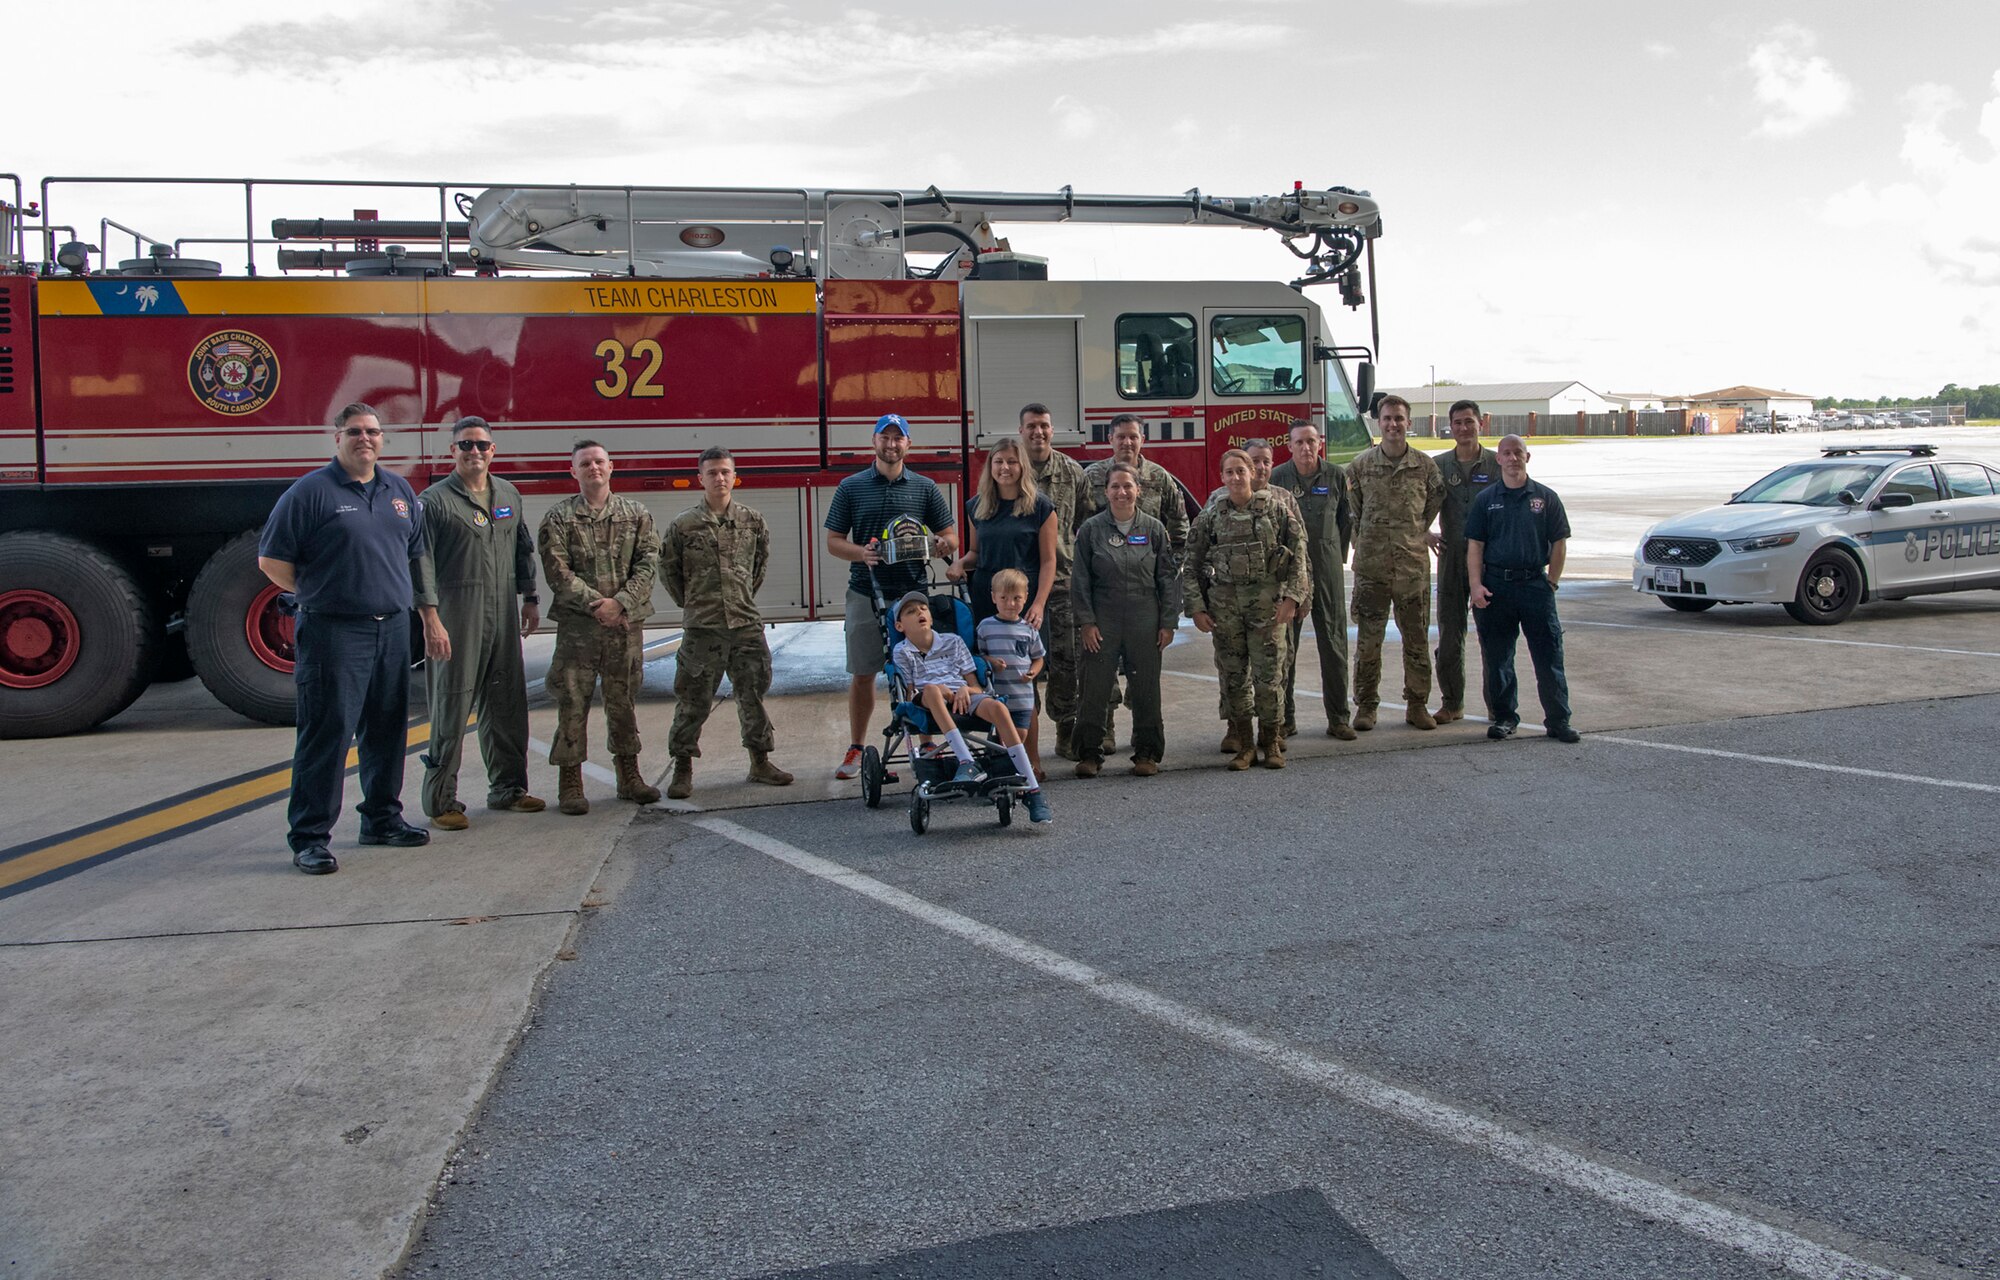 The Adkins family - Matt, Leslie, Braiden and Jace (center) pose for a group photo with aircrew, maintainers, firefighters and security forces at Joint Base Charleston, South Carolina.